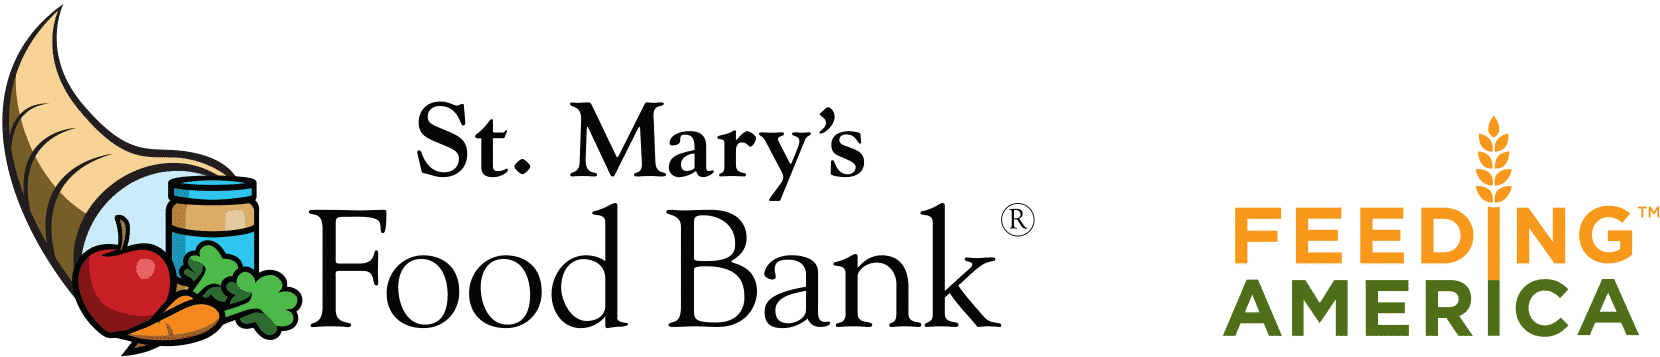 St MAry's Food Bank